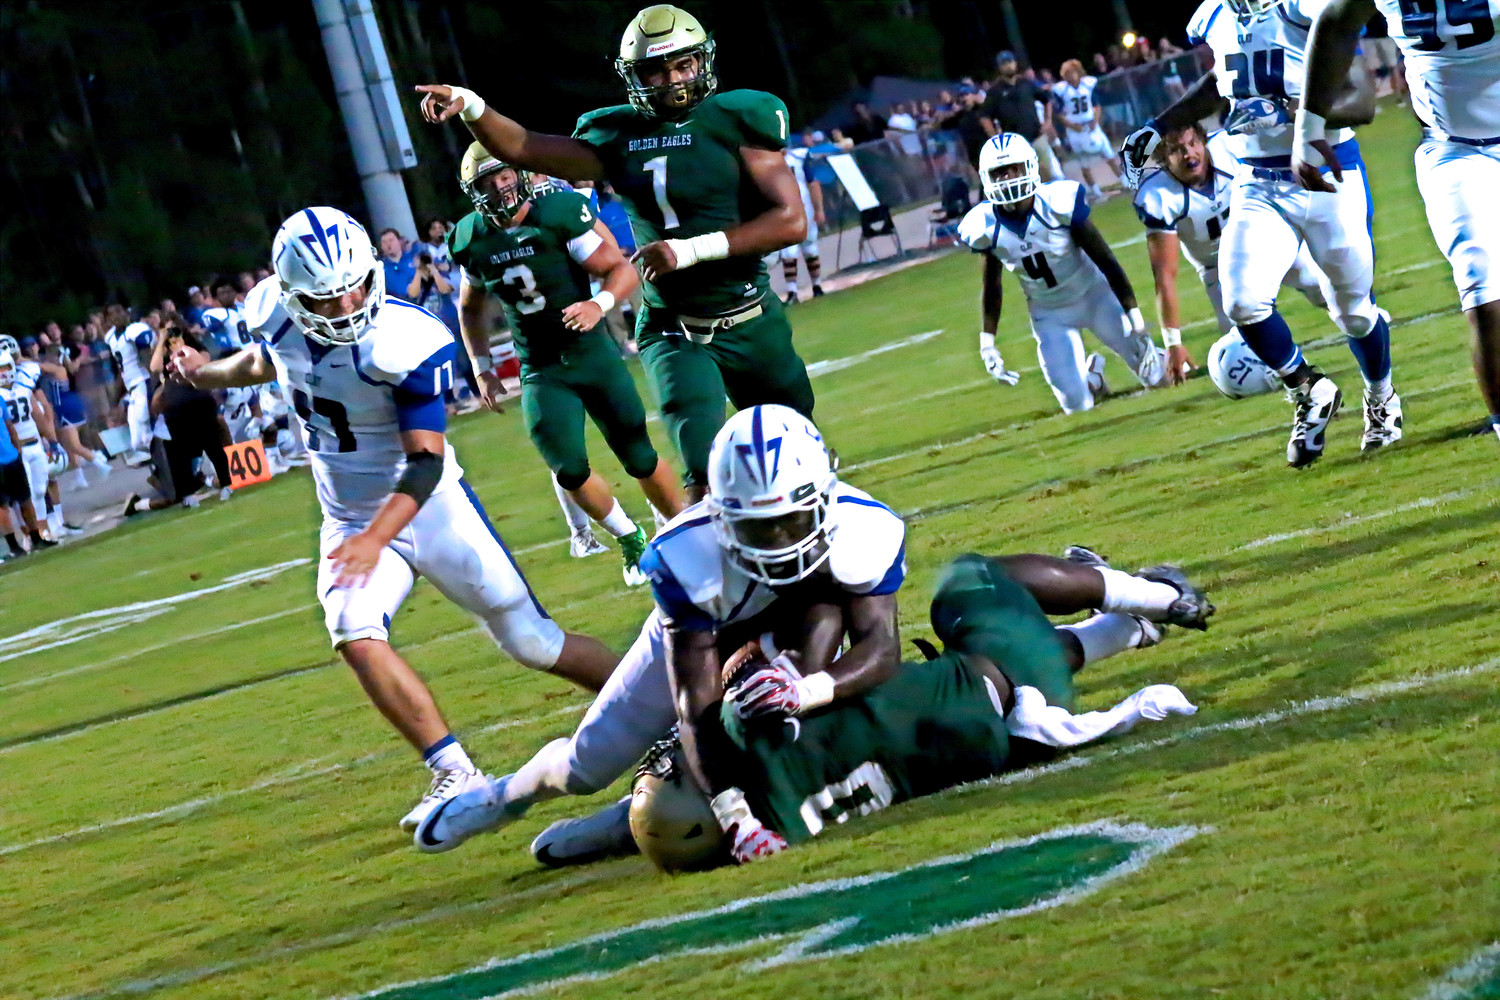 Returning senior fullback Chauncey Garrison pushed for 151 yards and this go-ahead score in the first half that tied the game at 7-7 in the first half.  Garrison suffered season-ending injury in game, but is set to run again in 2017.